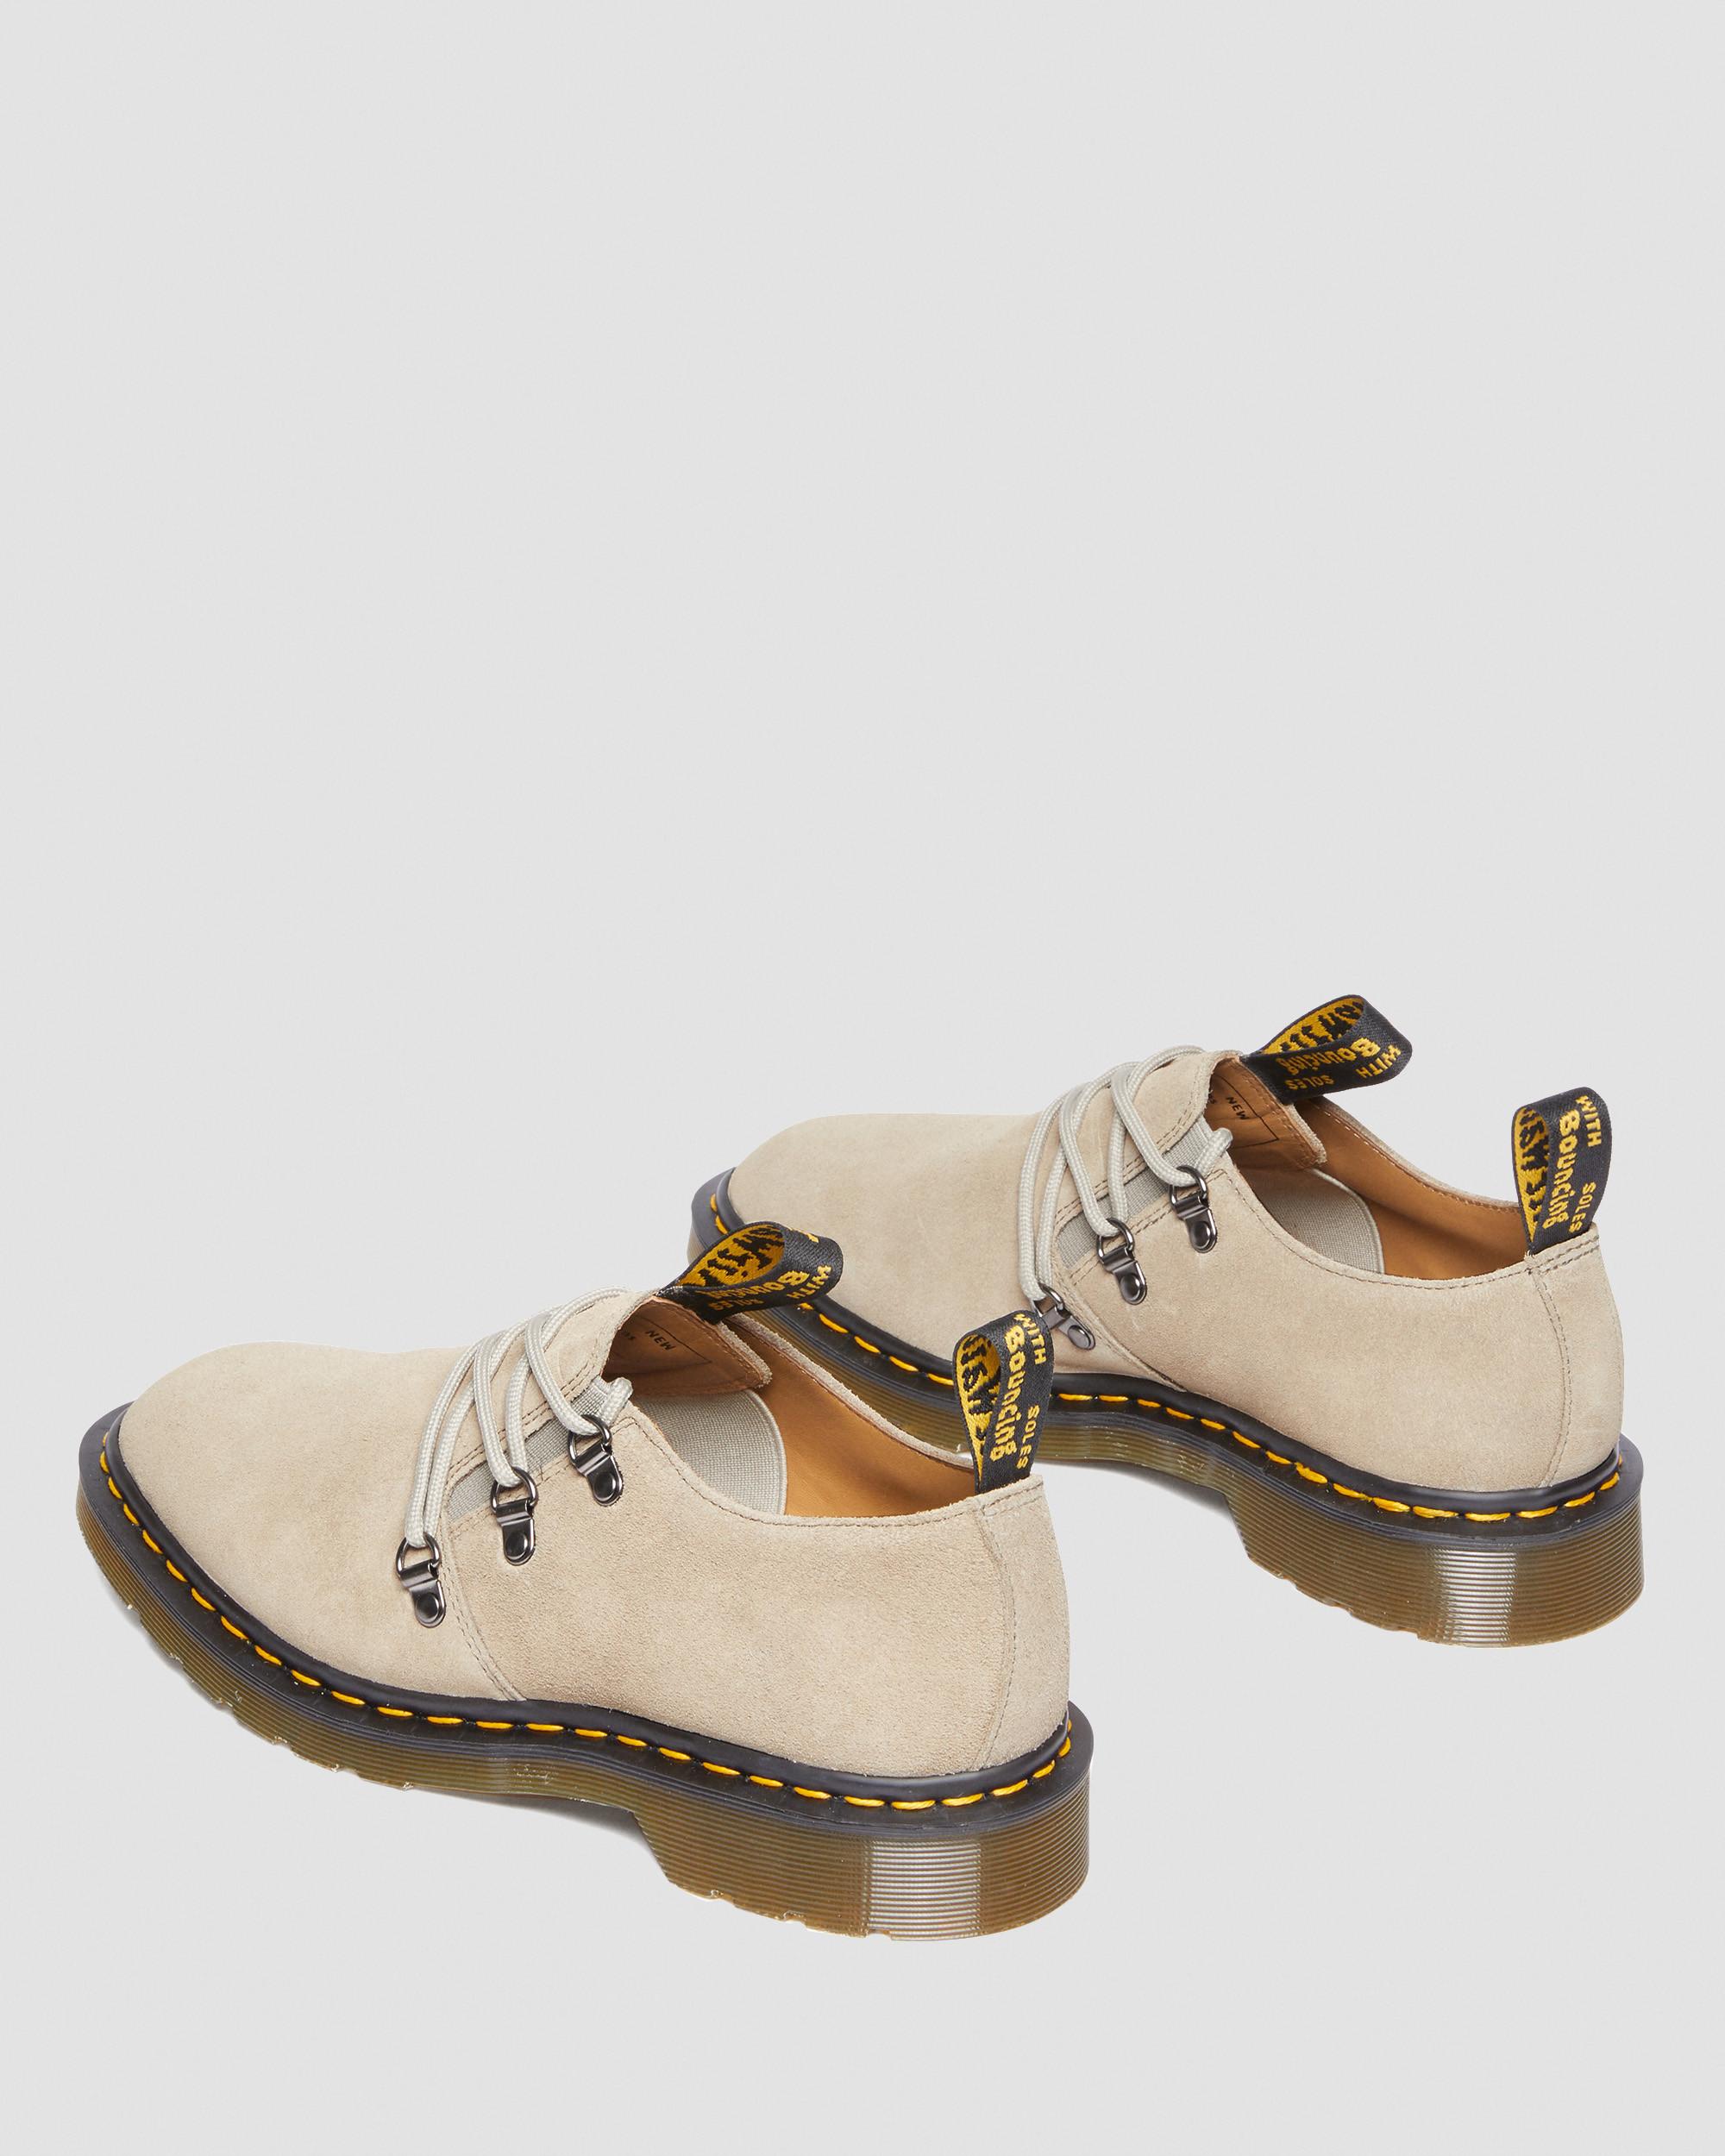 1461 Engineered Garments Suede Oxford Shoes     1461 Engineered Garments Suede Oxford Shoes   Dr. Martens